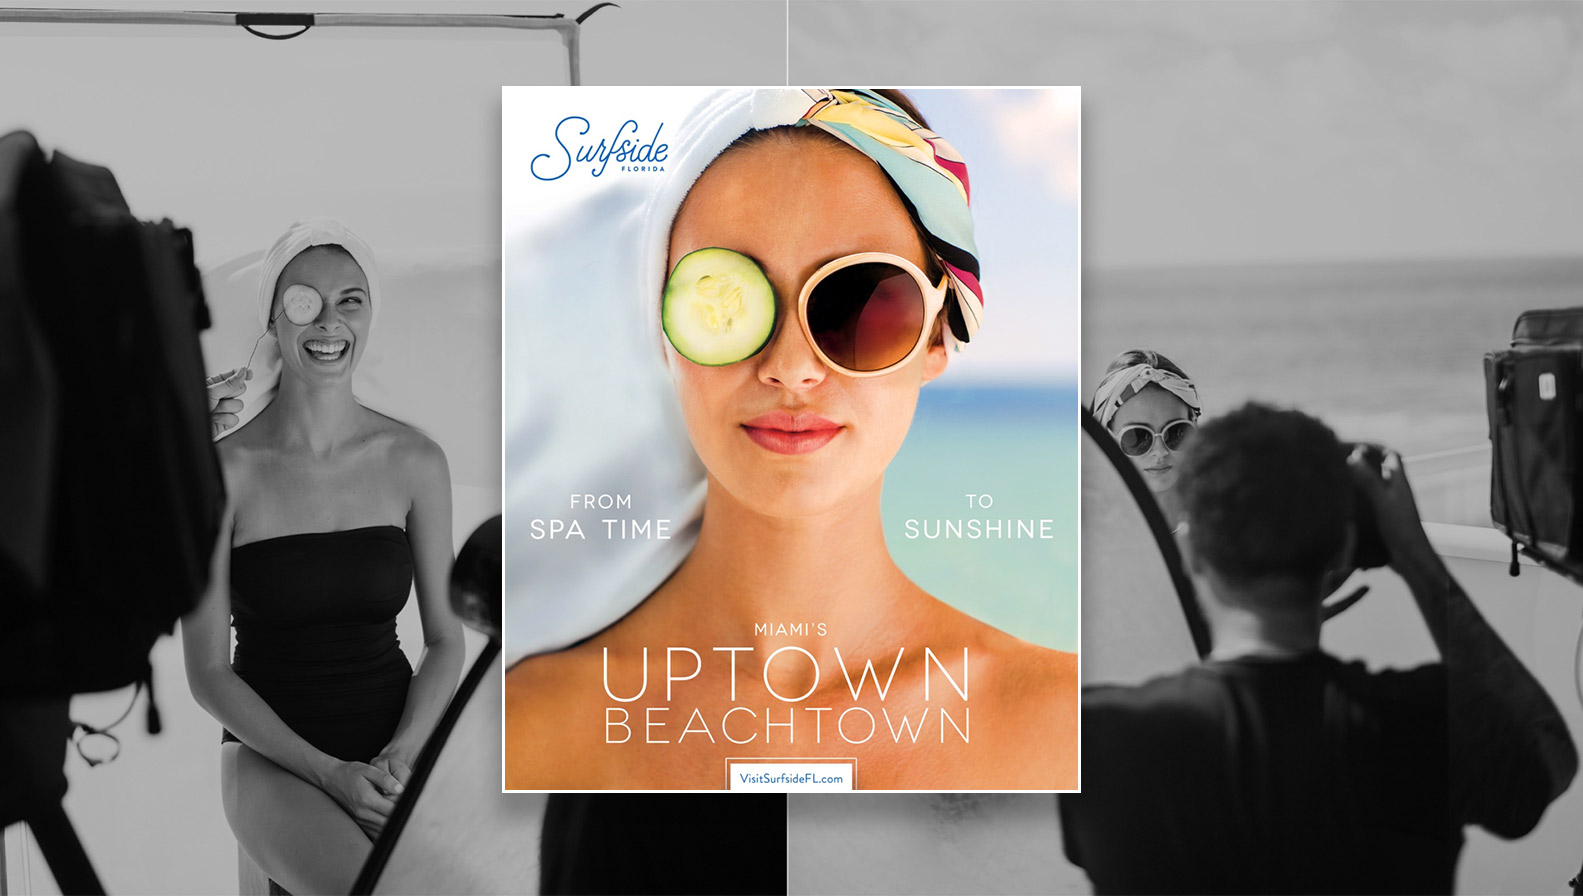 Jacober Creative Identity and Campaign for the Town of Surfside Florida - Photo of magazine ads for the Uptown Beachtown campaign. Woman is wearing sunglasses but on the left she's in a spa with a cucumber on her left eye, on the right, she's outside